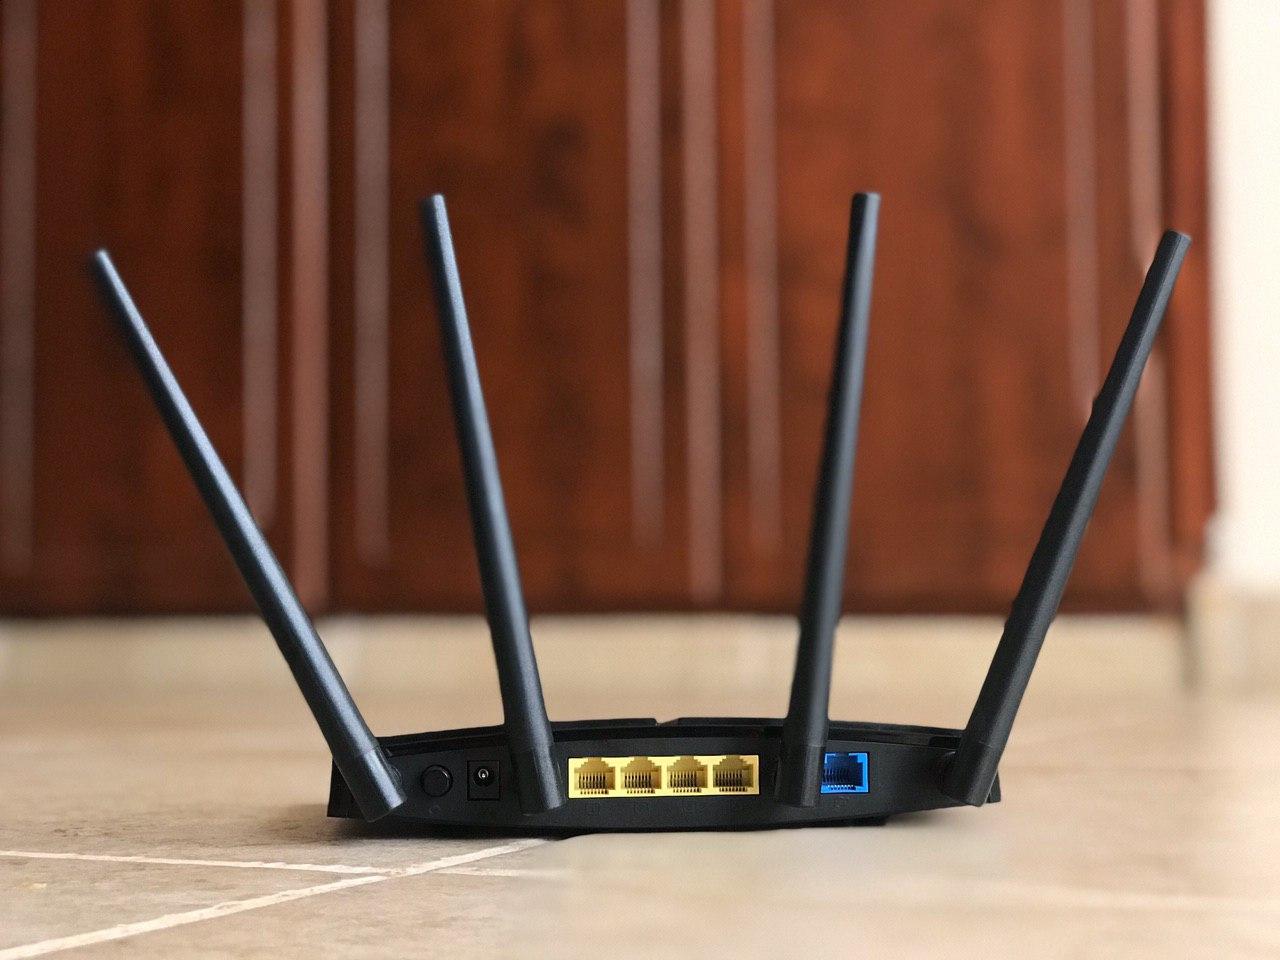 Top Unlocked 4G LTE WiFi Routers You should buy in 2021 Dignited